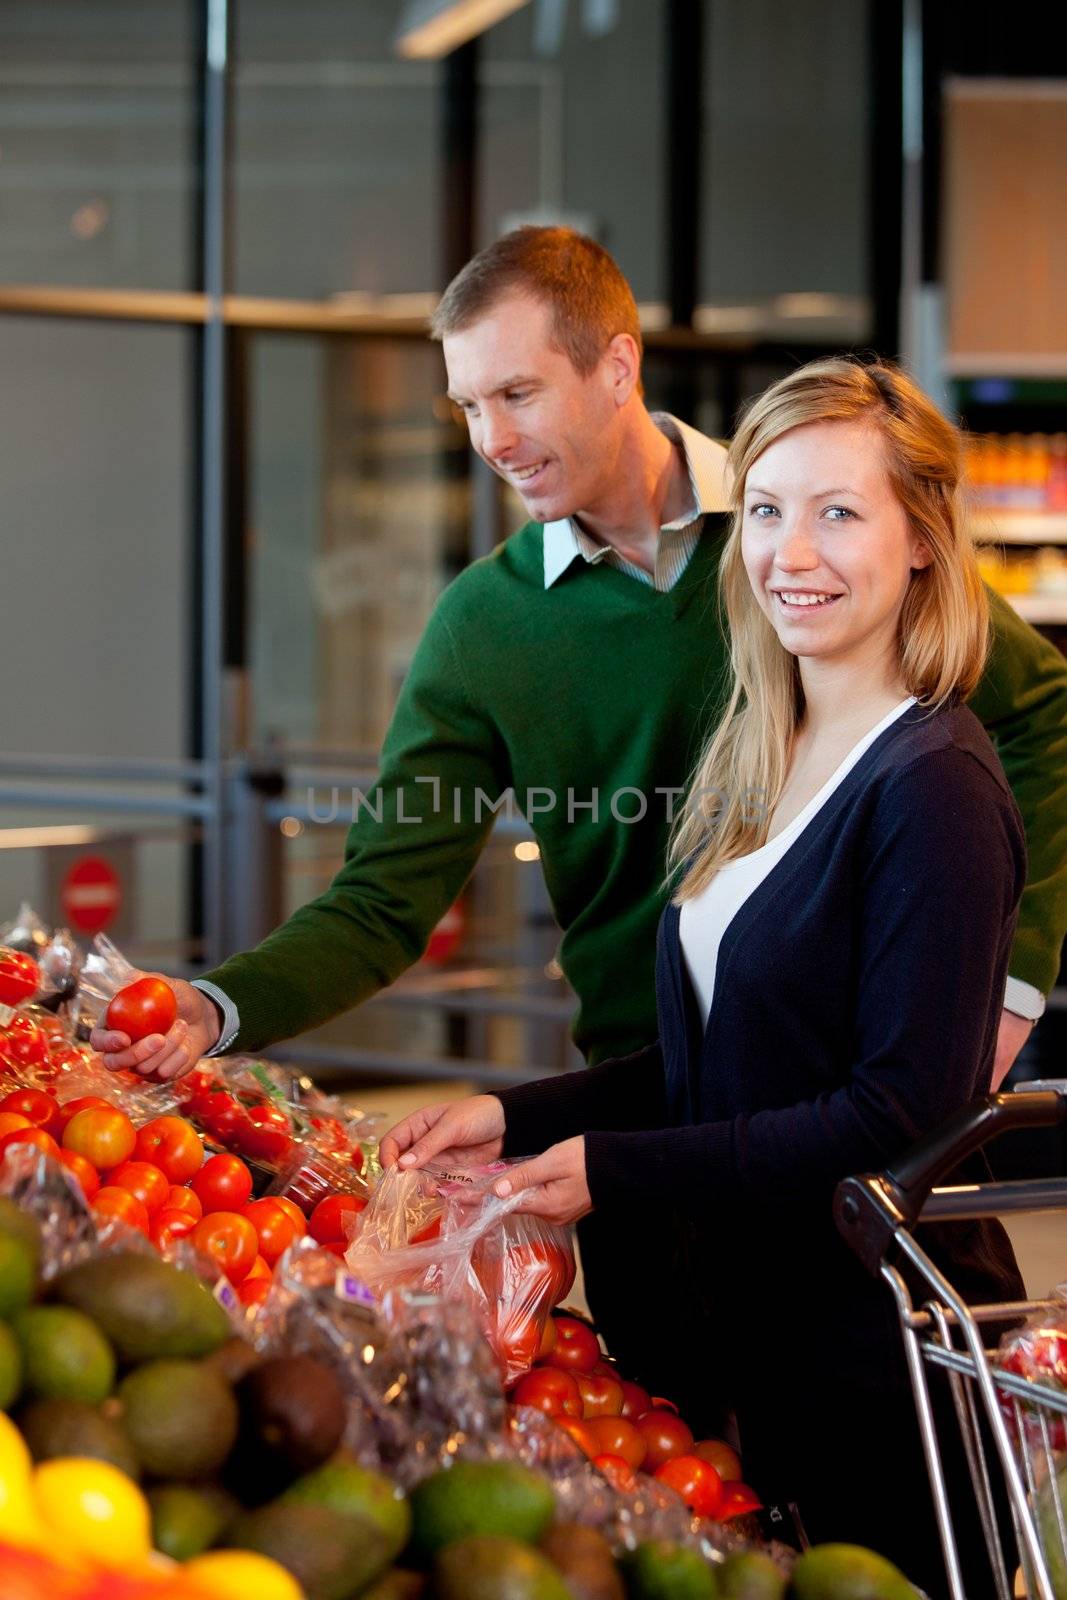 Portrait of Couple in Supermarket by leaf